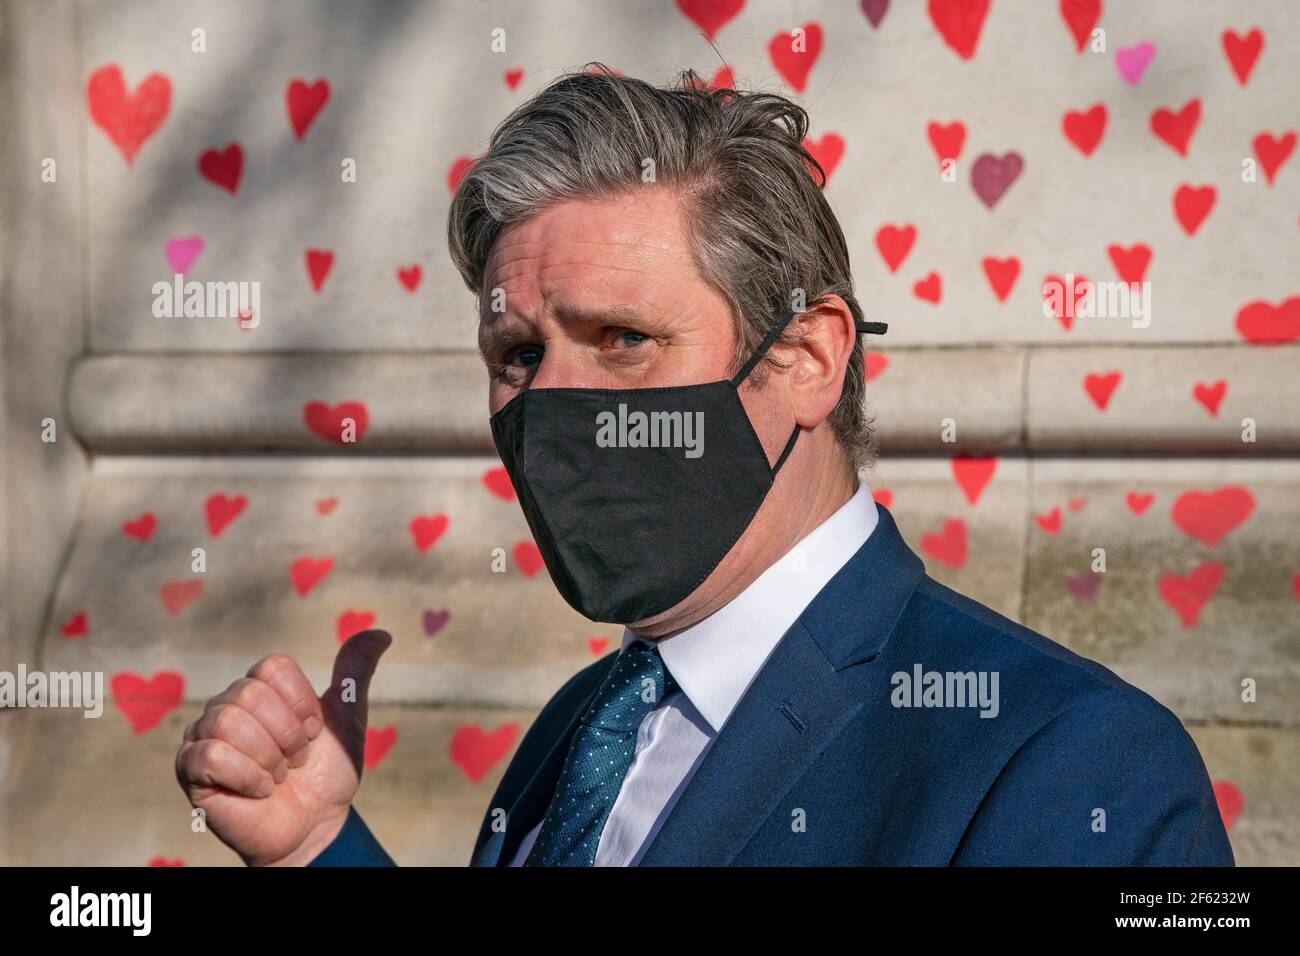 Labour Party leader Keir Starmer visits the COVID-19 Memorial Wall on the Embankment, central London, which has been painted with hearts in memory of the more than 145,000 people who have died in the UK from coronavirus. Picture date: Monday March 29, 2021. Stock Photo